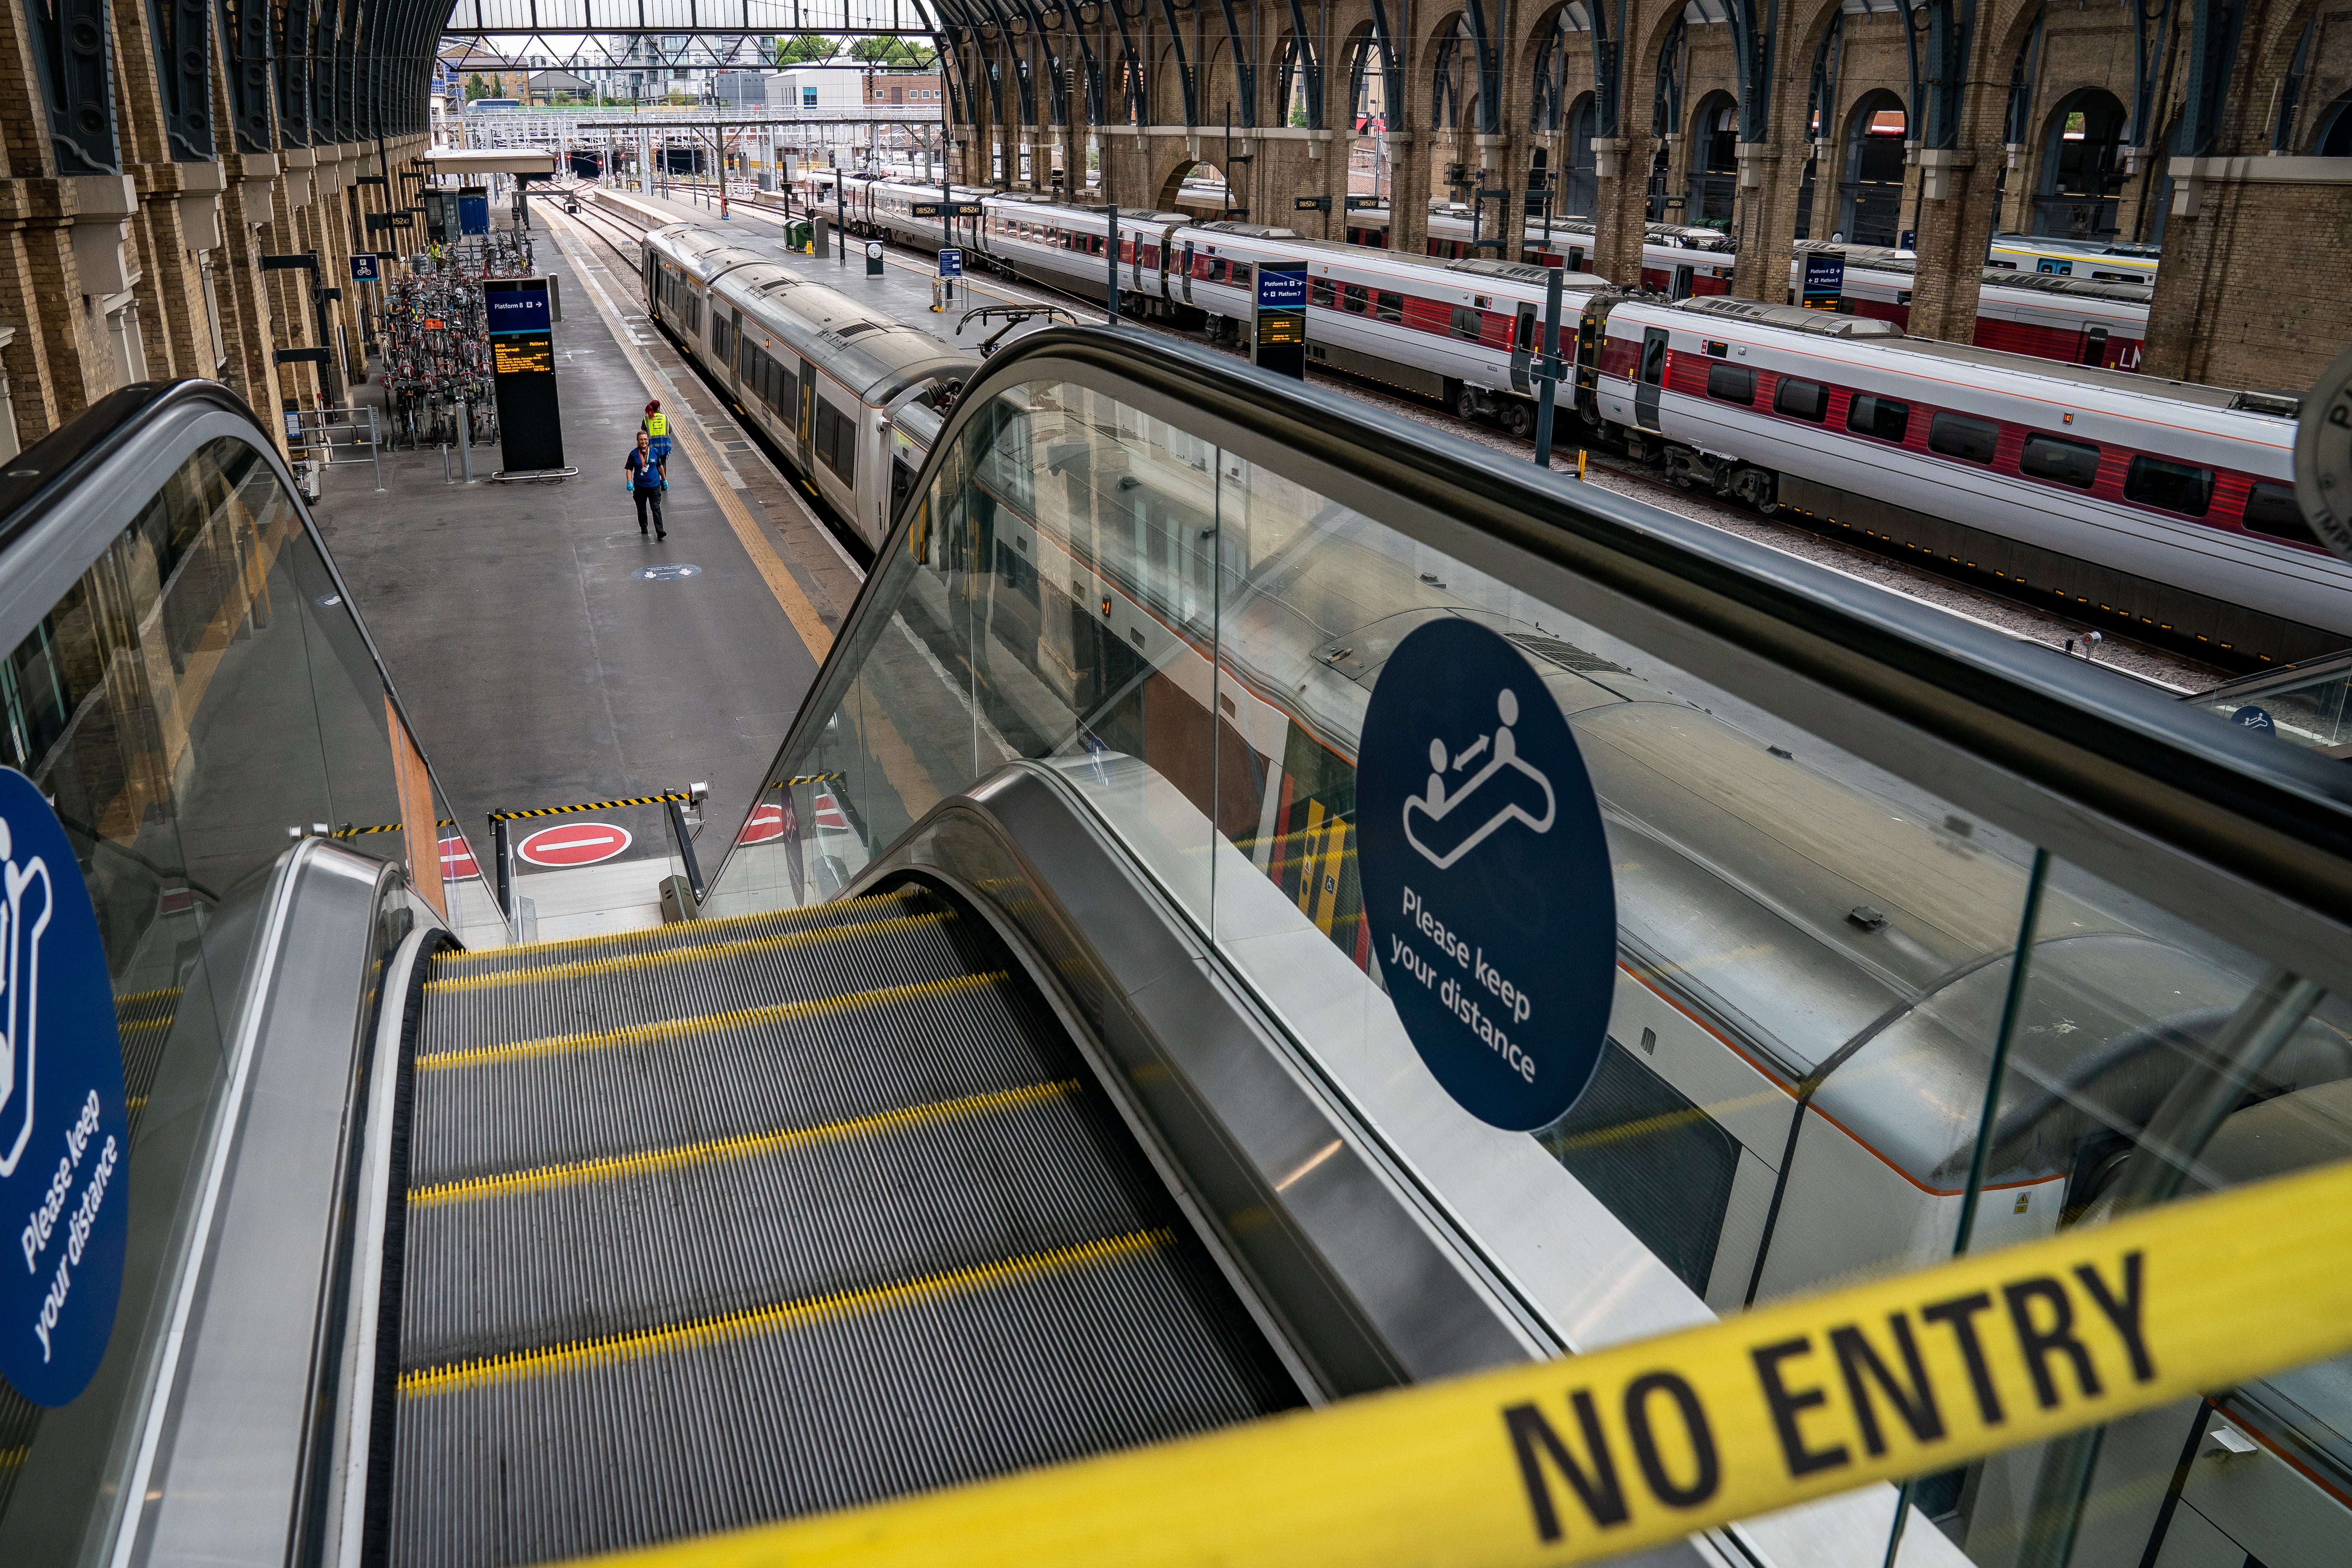 A platform is closed off at King’s Cross station in London (Aaron Chown/PA)